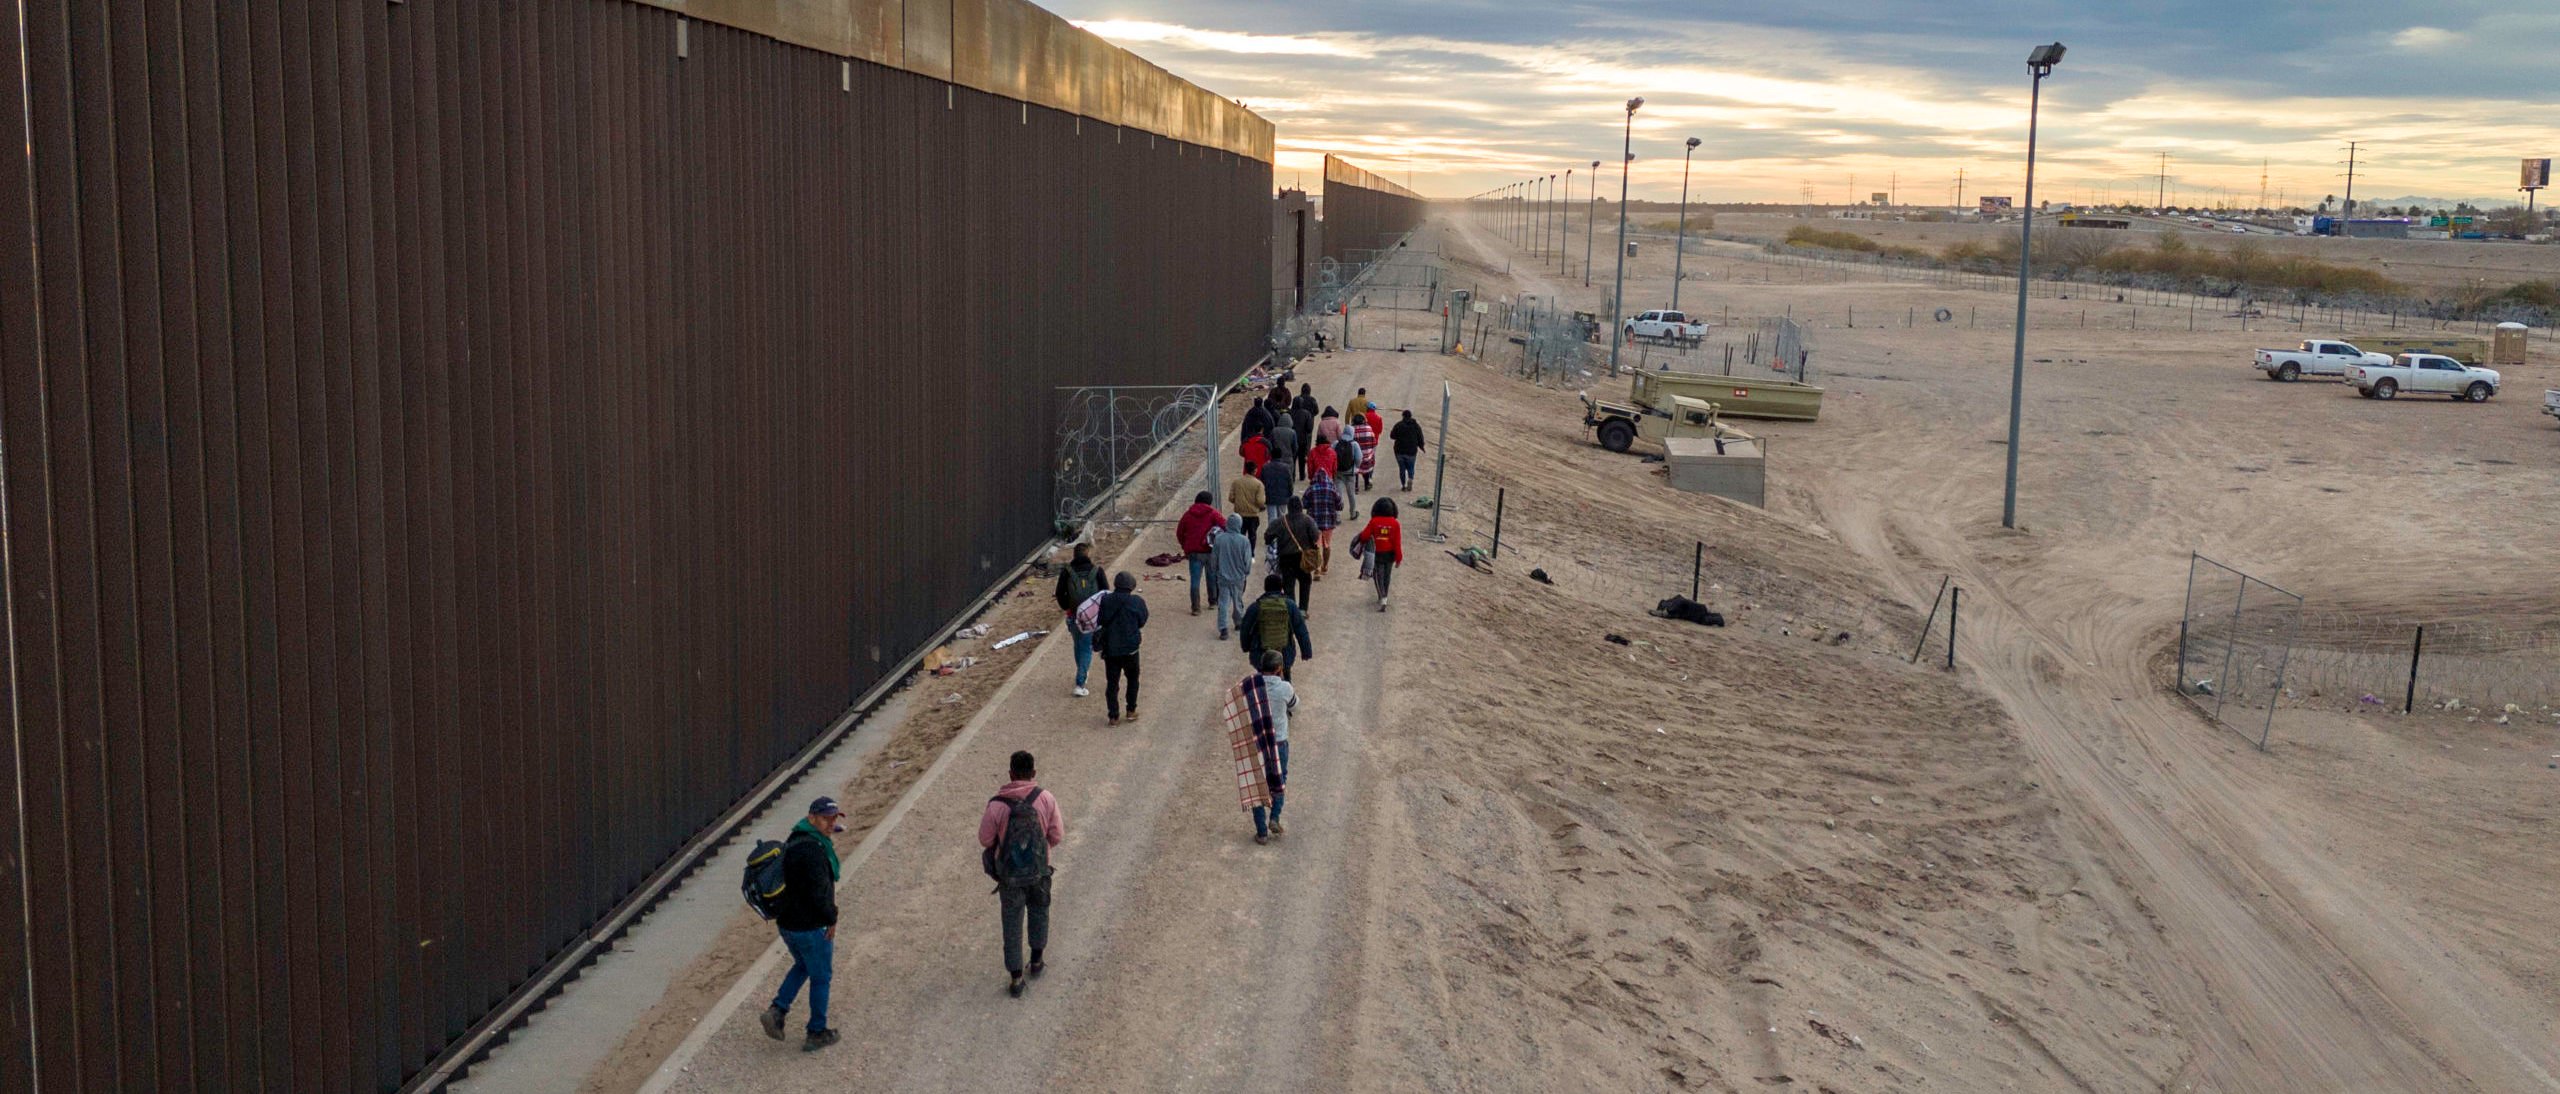 EL PASO, TEXAS - FEBRUARY 01: Seen from an aerial view, immigrants walk along the U.S.-Mexico border wall after crossing the Rio Grande into El Paso, Texas on February 01, 2024 from El Paso, Texas. They had also passed through razor wire set by Texas National Guard troops in order to proceed for processing by U.S. Border Patrol agents. (Photo by John Moore/Getty Images)